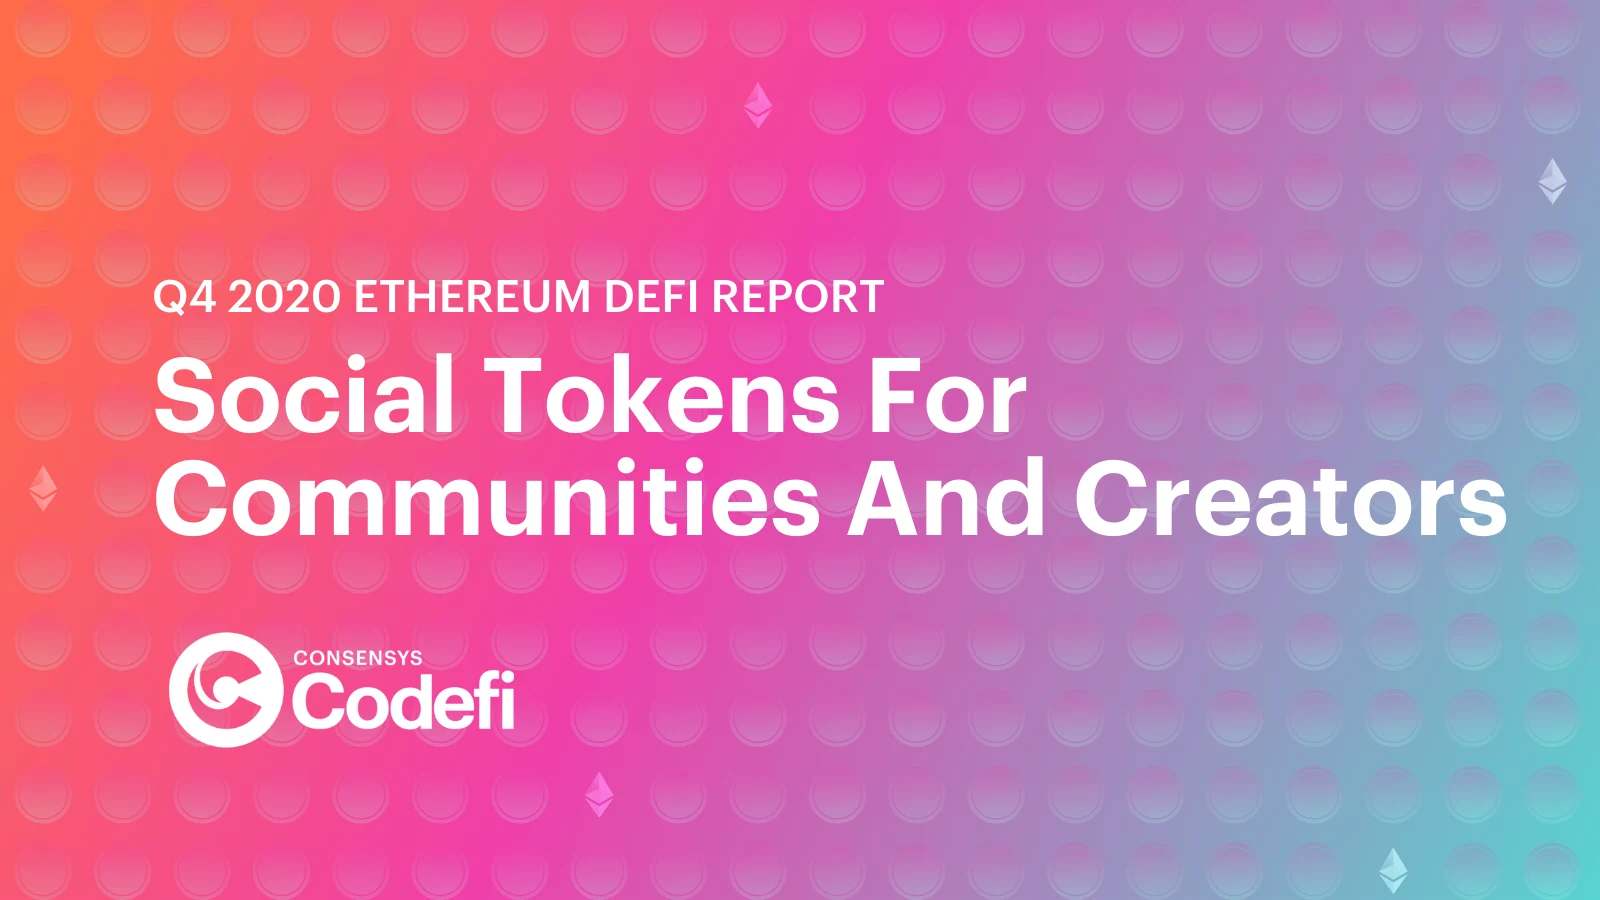 Image: Friends With Benefits: A New Model for Social Tokens on Ethereum